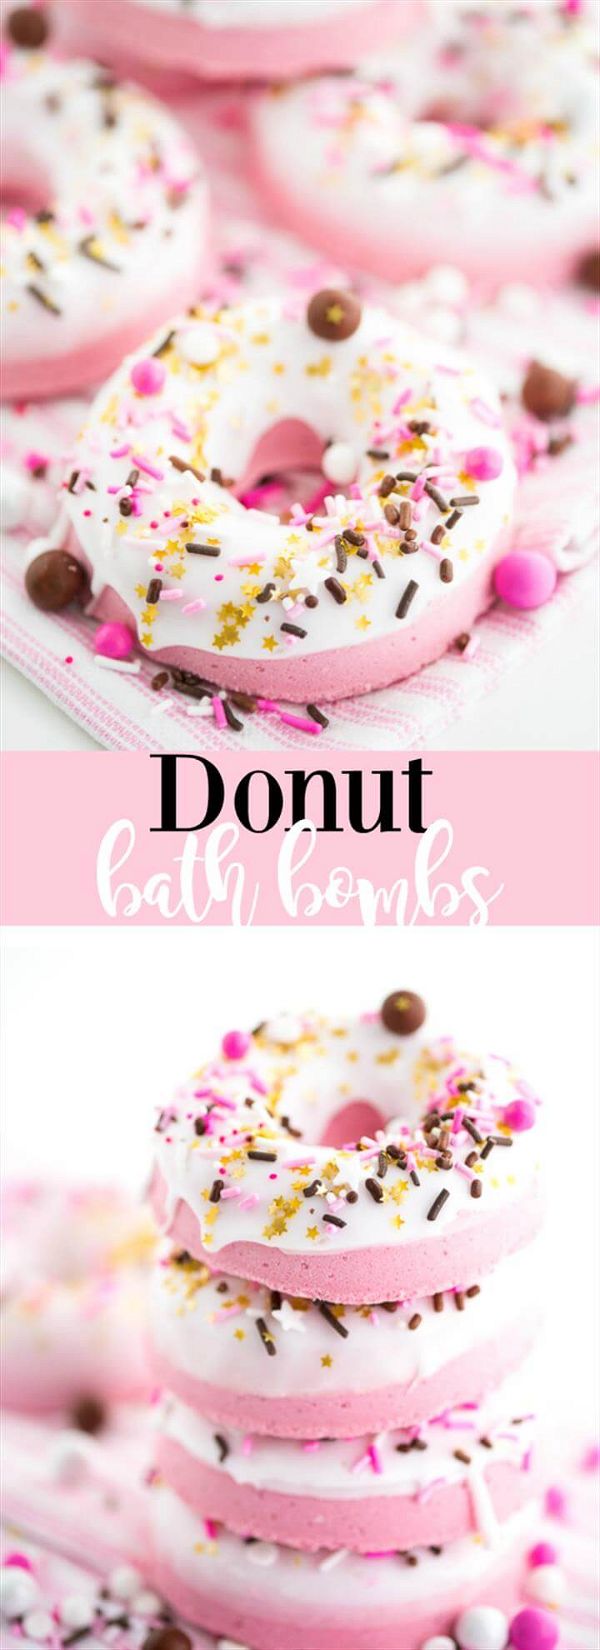 donut bath bombs – DIY donut shaped bath bombs made with soap icing